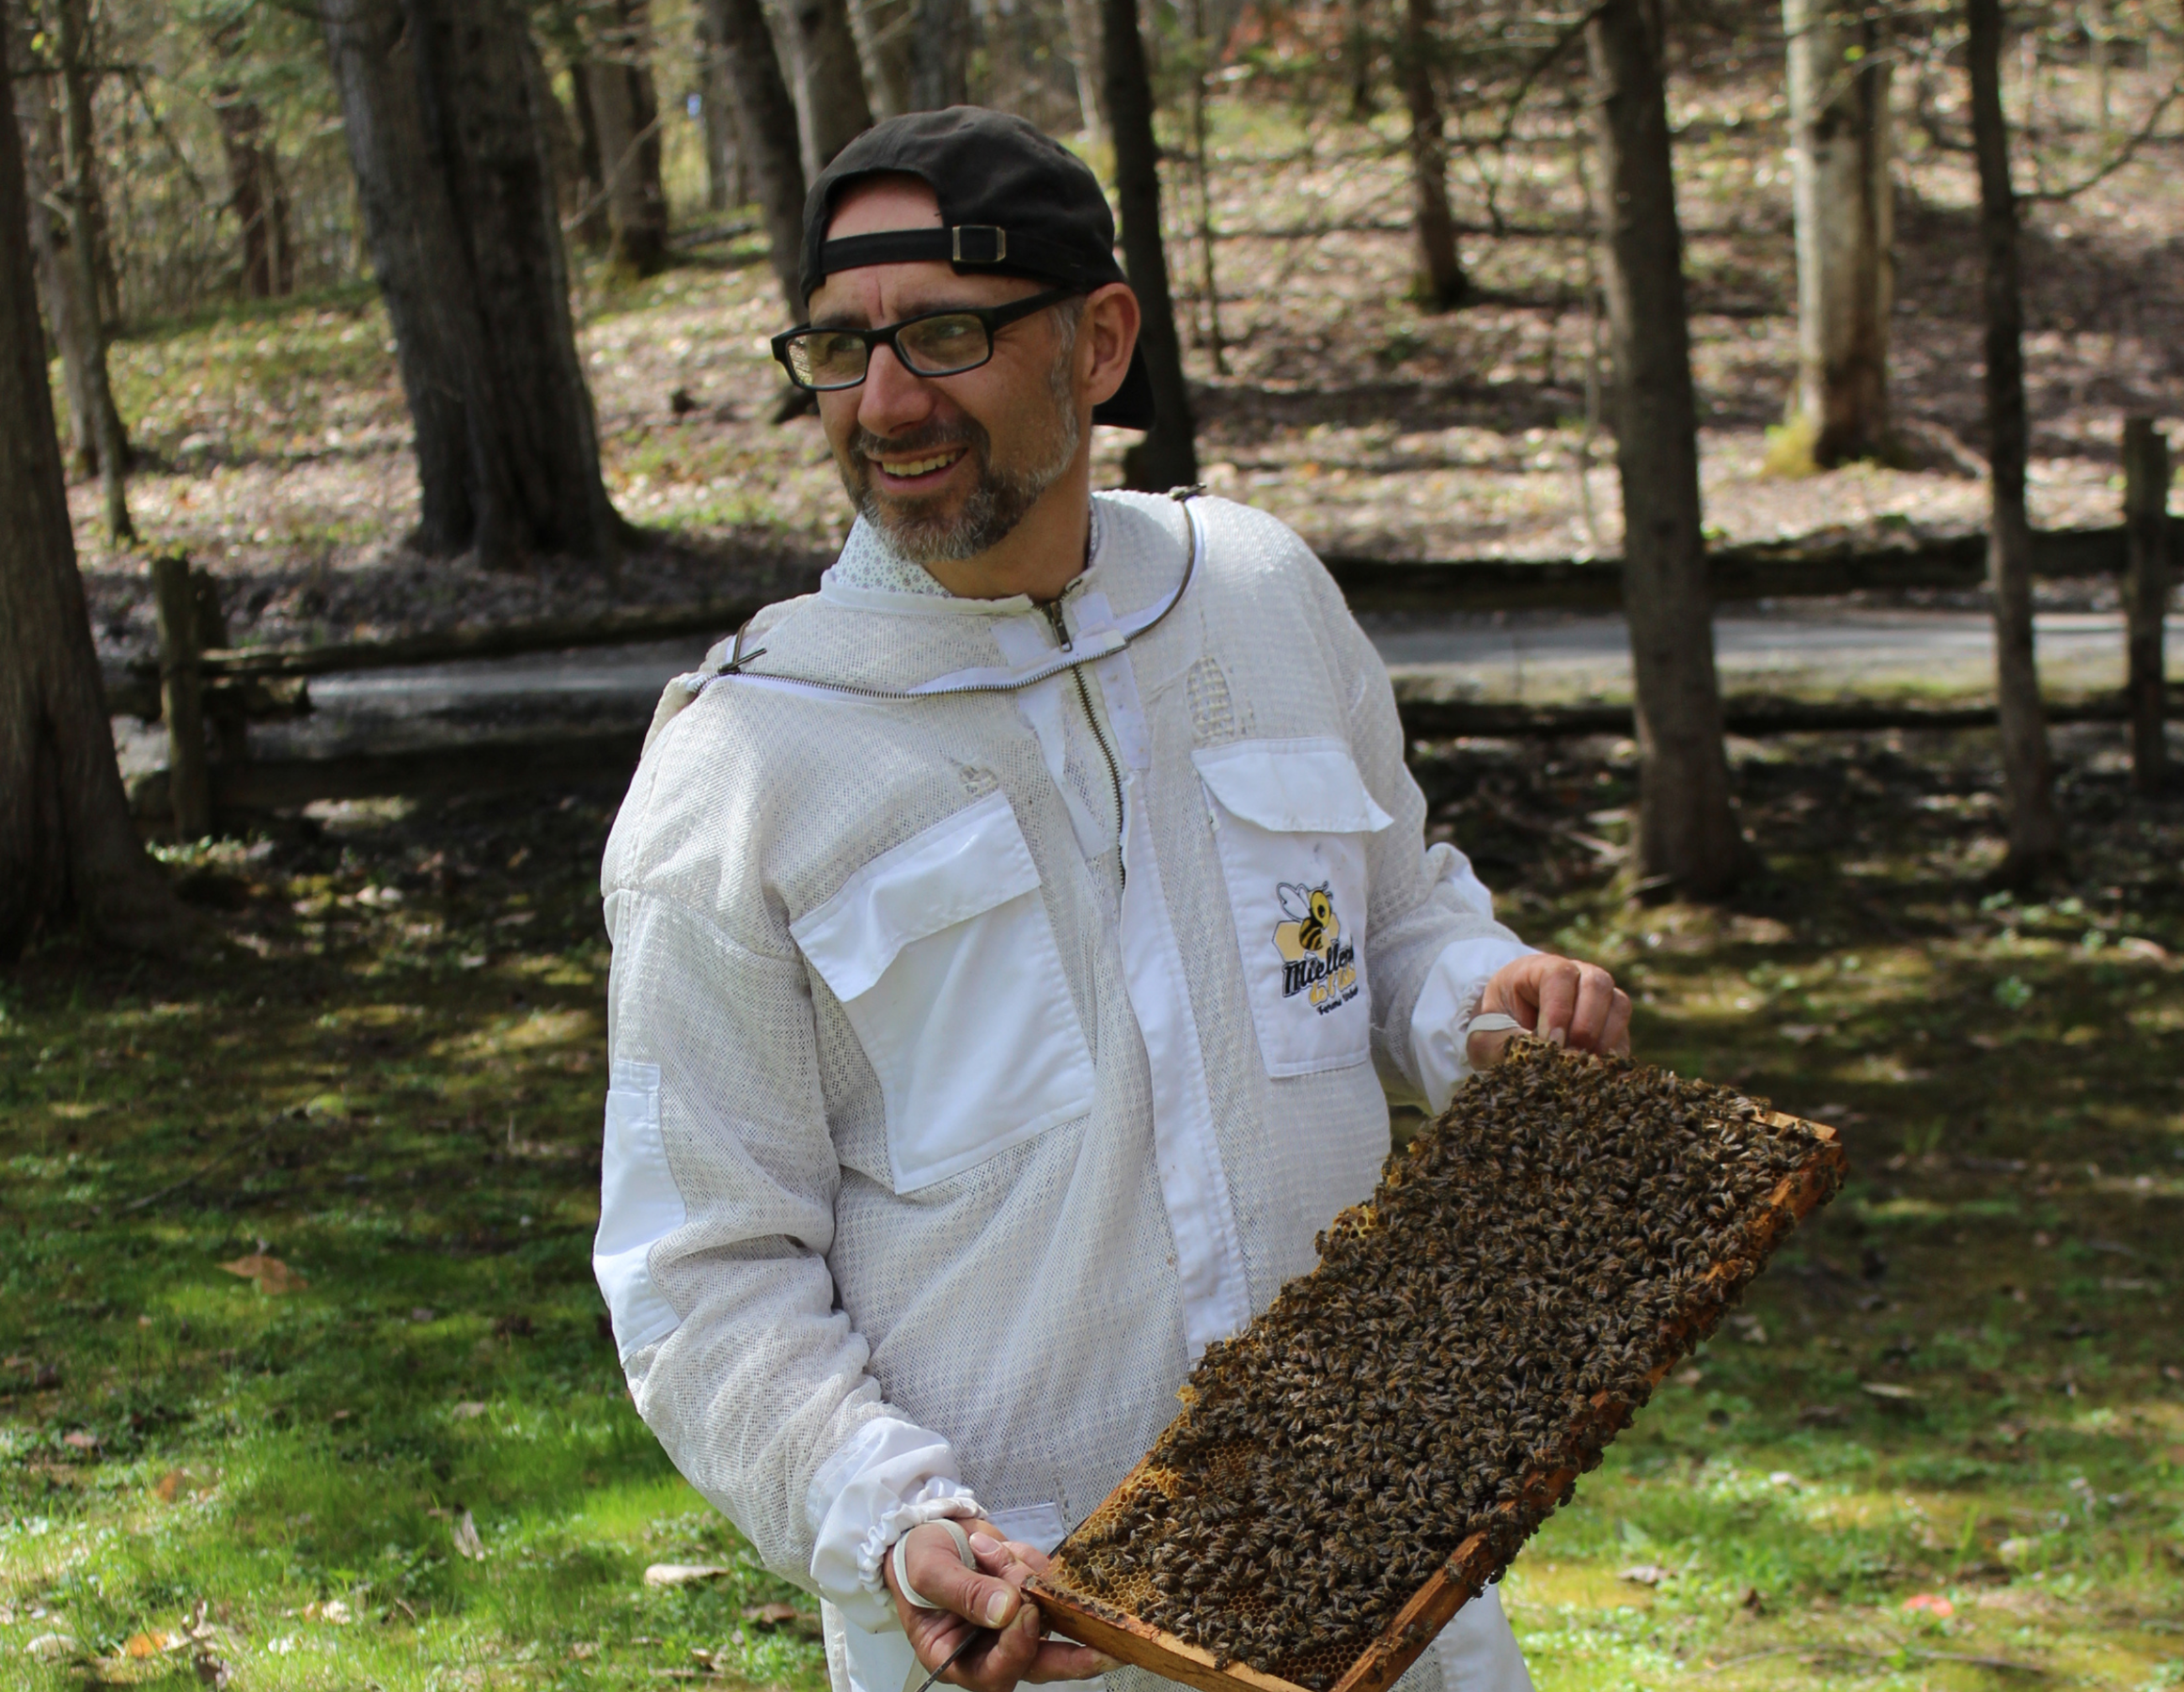 The hotel's beekeeper looks after the bees